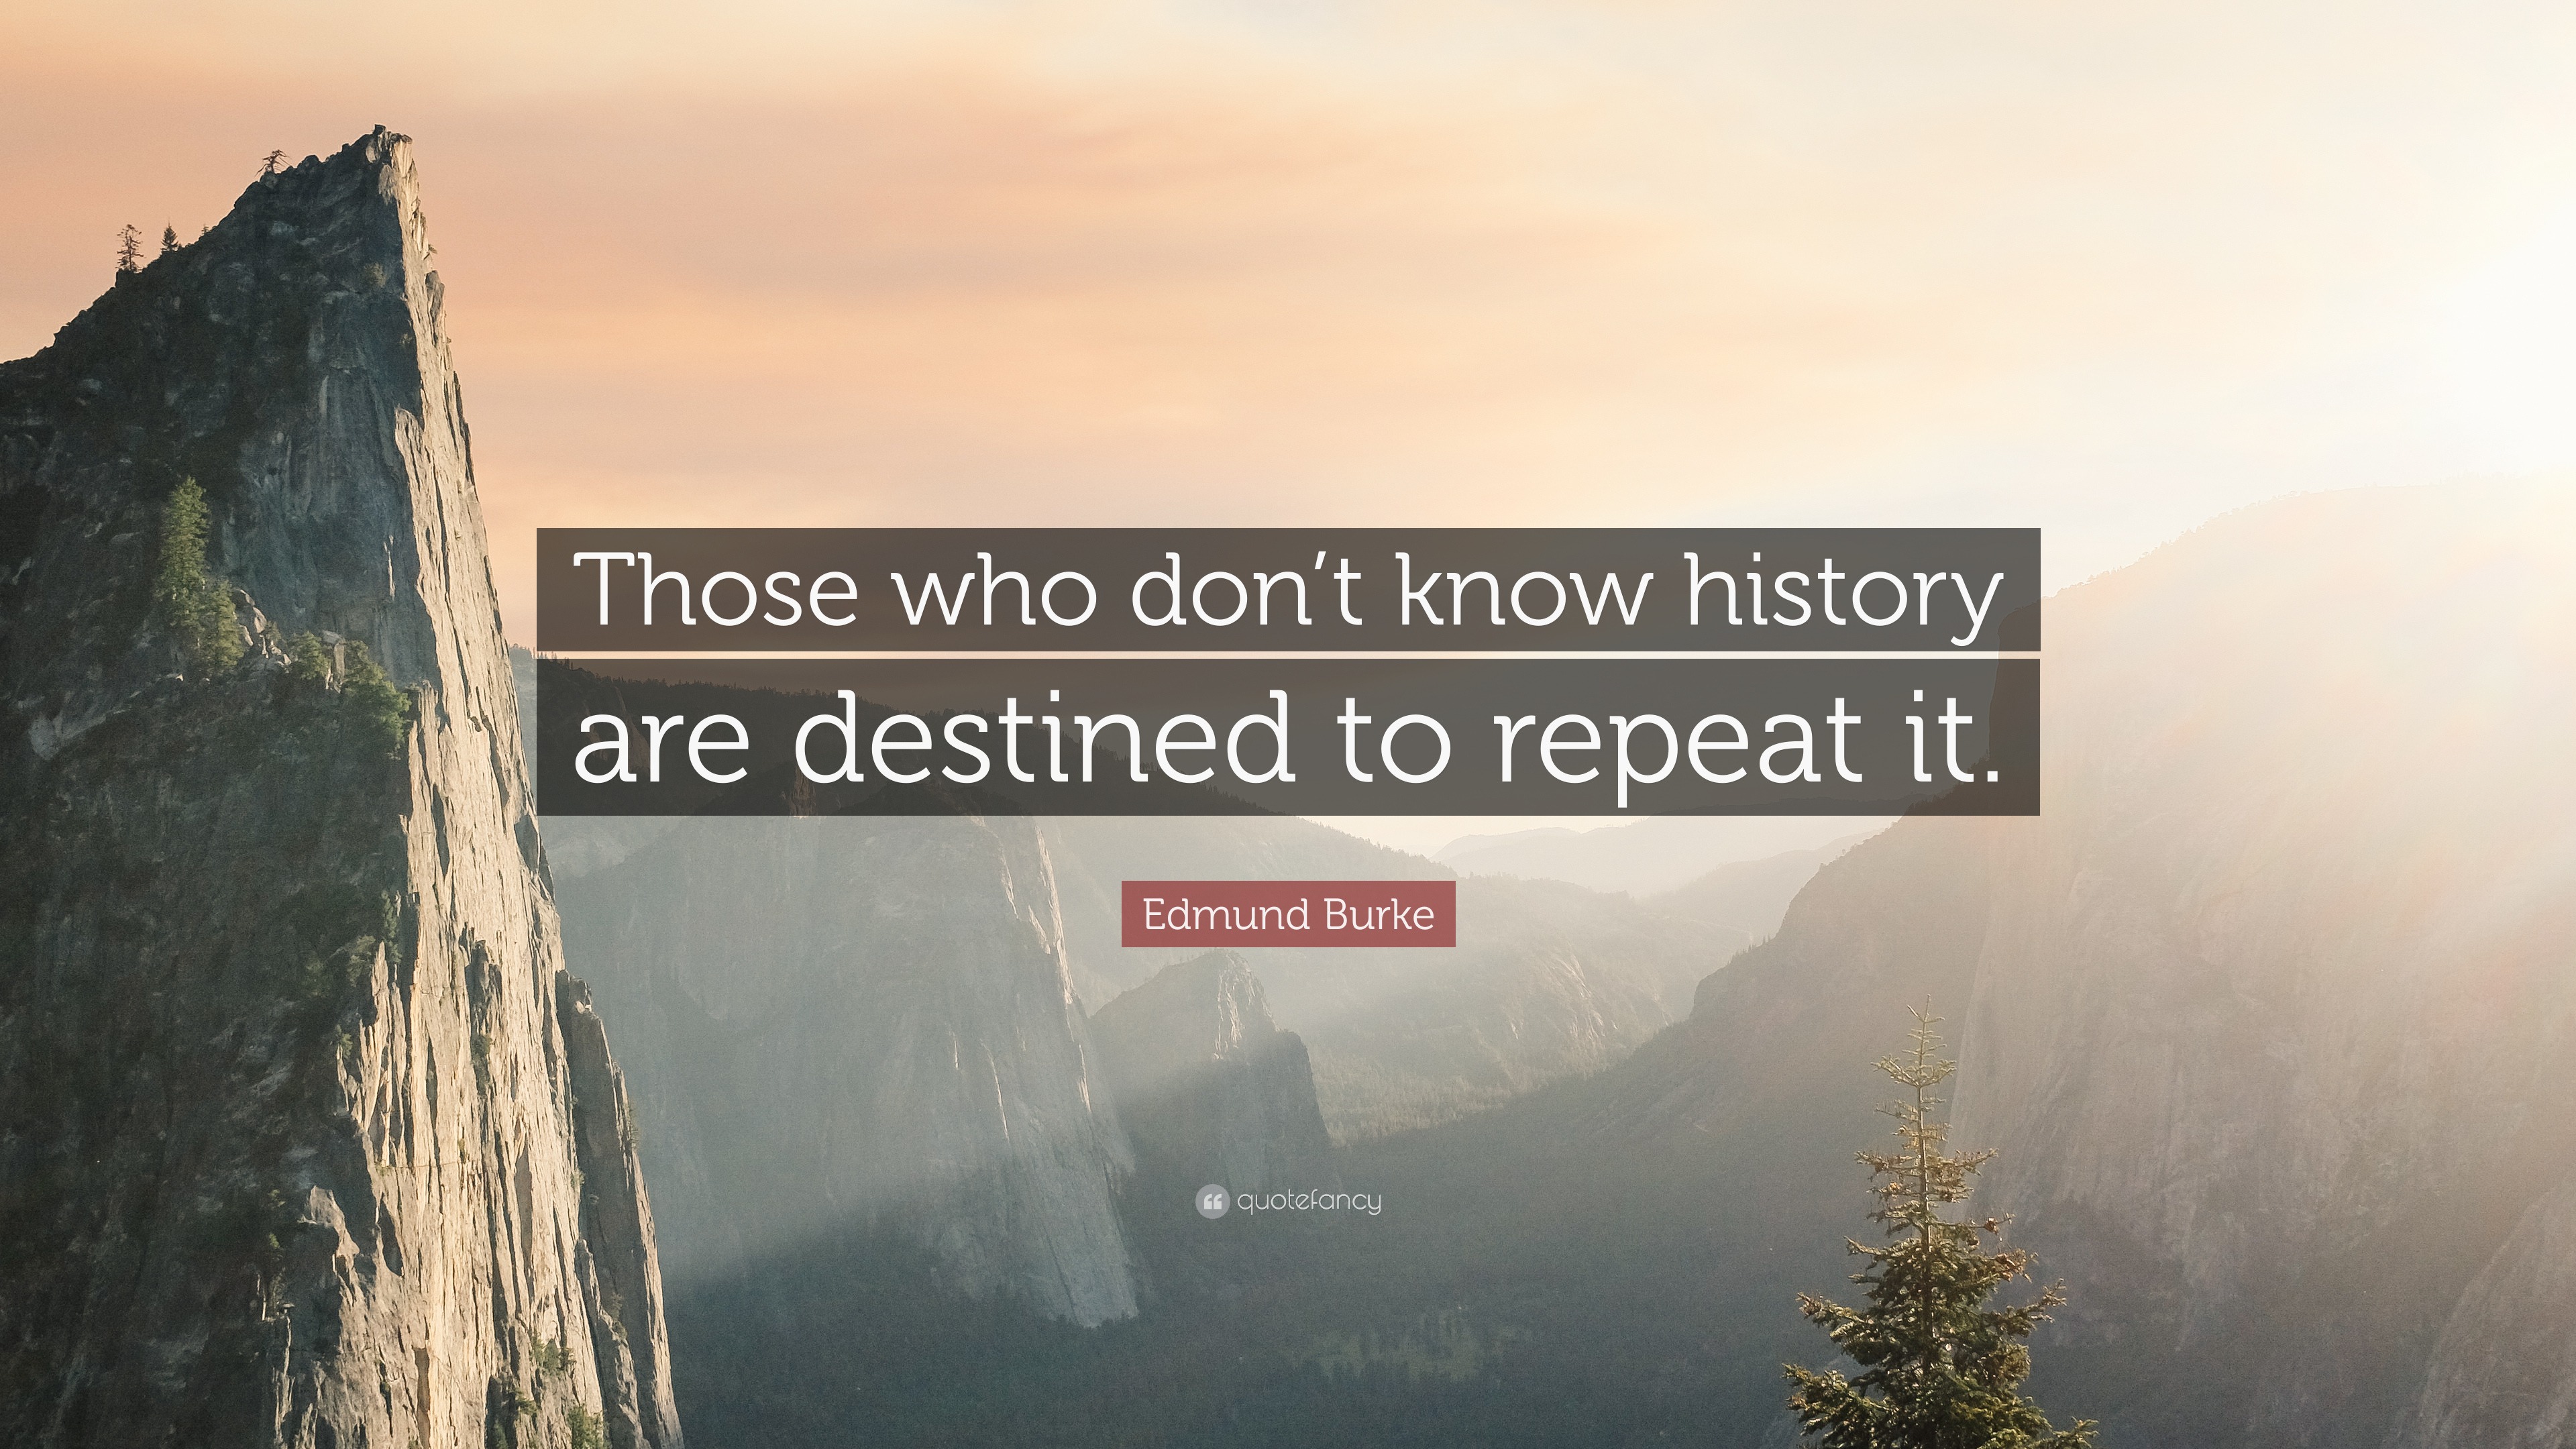 Edmund Burke Quote: “Those who don’t know history are destined to